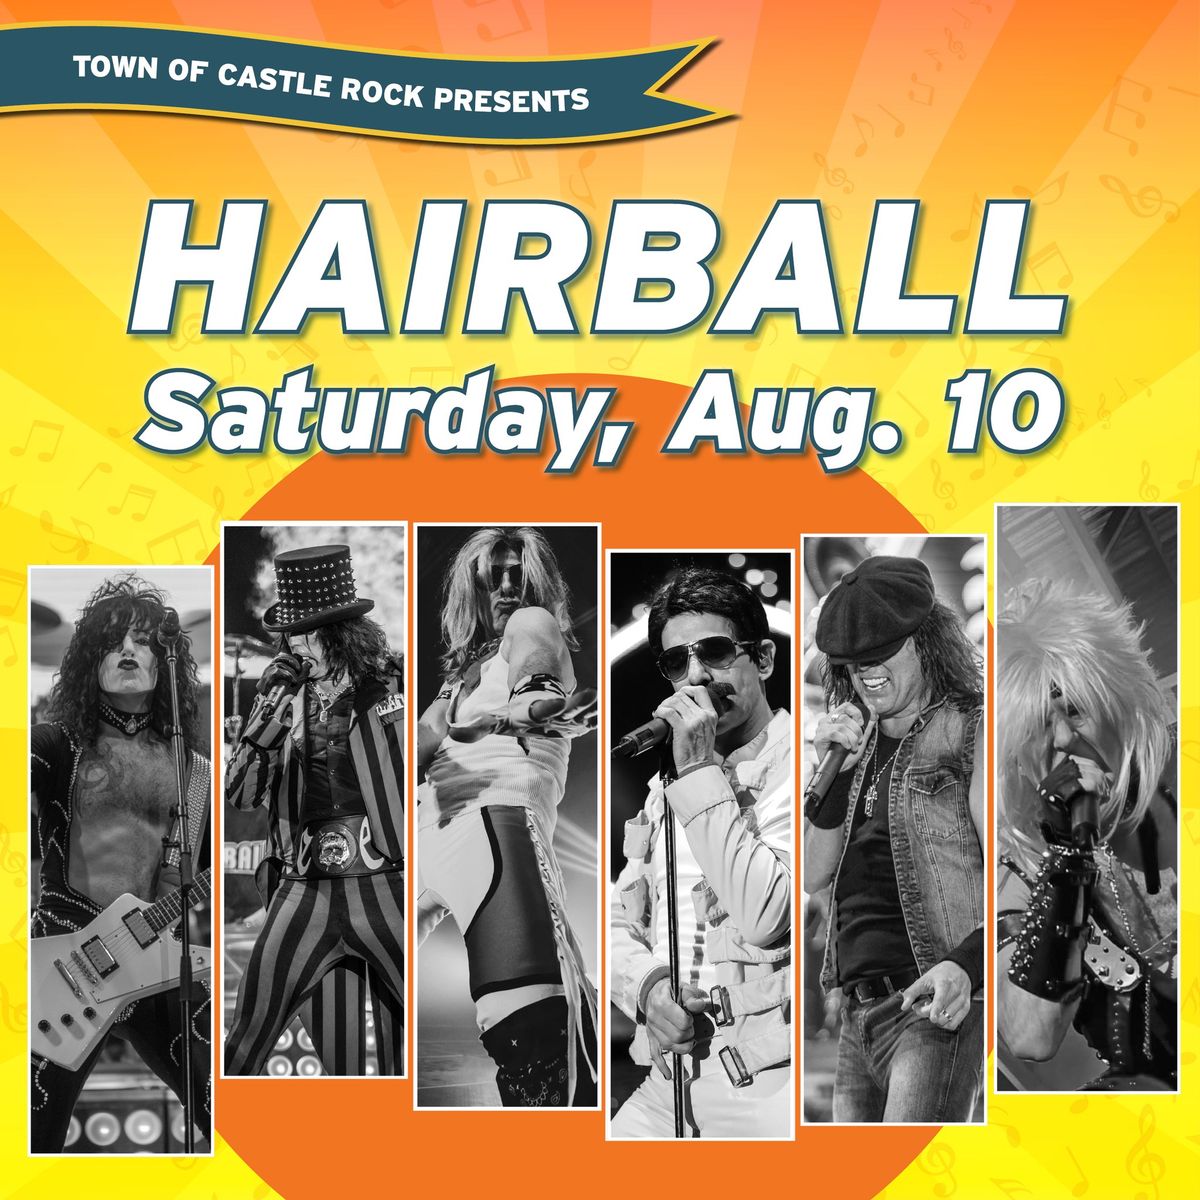 Summer Concert Series \u2014 HAIRBALL with special guest Flashback Heart Attack